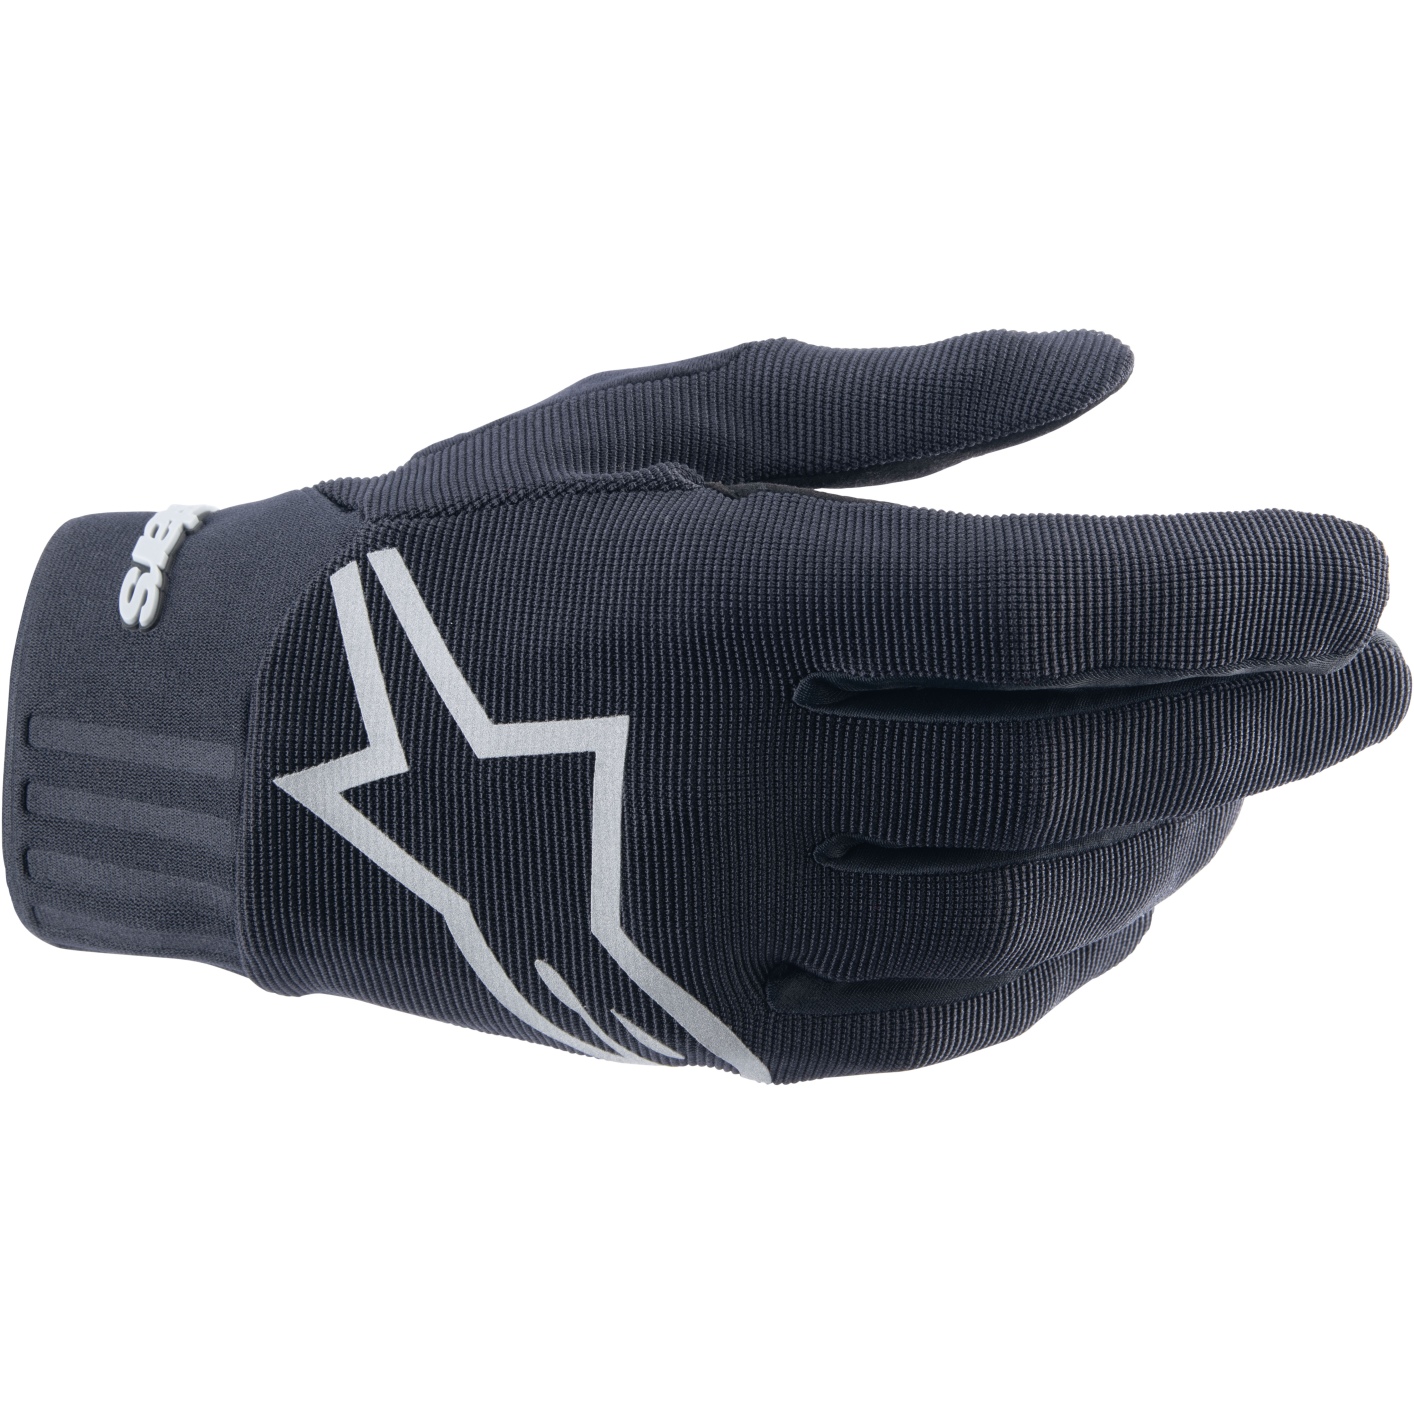 Picture of Alpinestars Youth A-Dura Gloves Kids - black